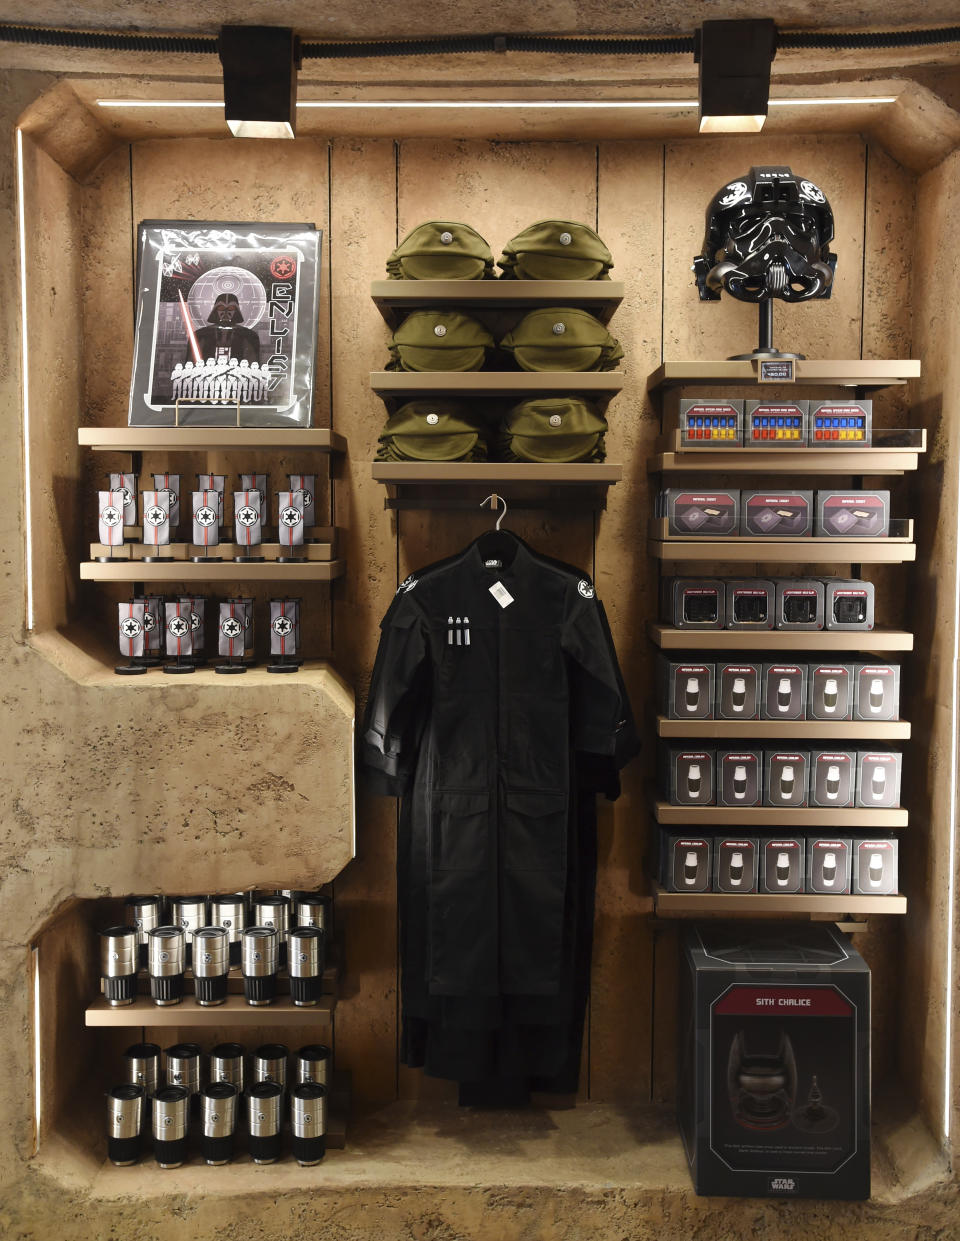 "Star Wars"-themed apparel is displayed inside the Dok-Ondar's Den of Antiquities store during the Star Wars: Galaxy's Edge Media Preview at Disneyland Park, Wednesday, May 29, 2019, in Anaheim, Calif. (Photo by Chris Pizzello/Invision/AP)